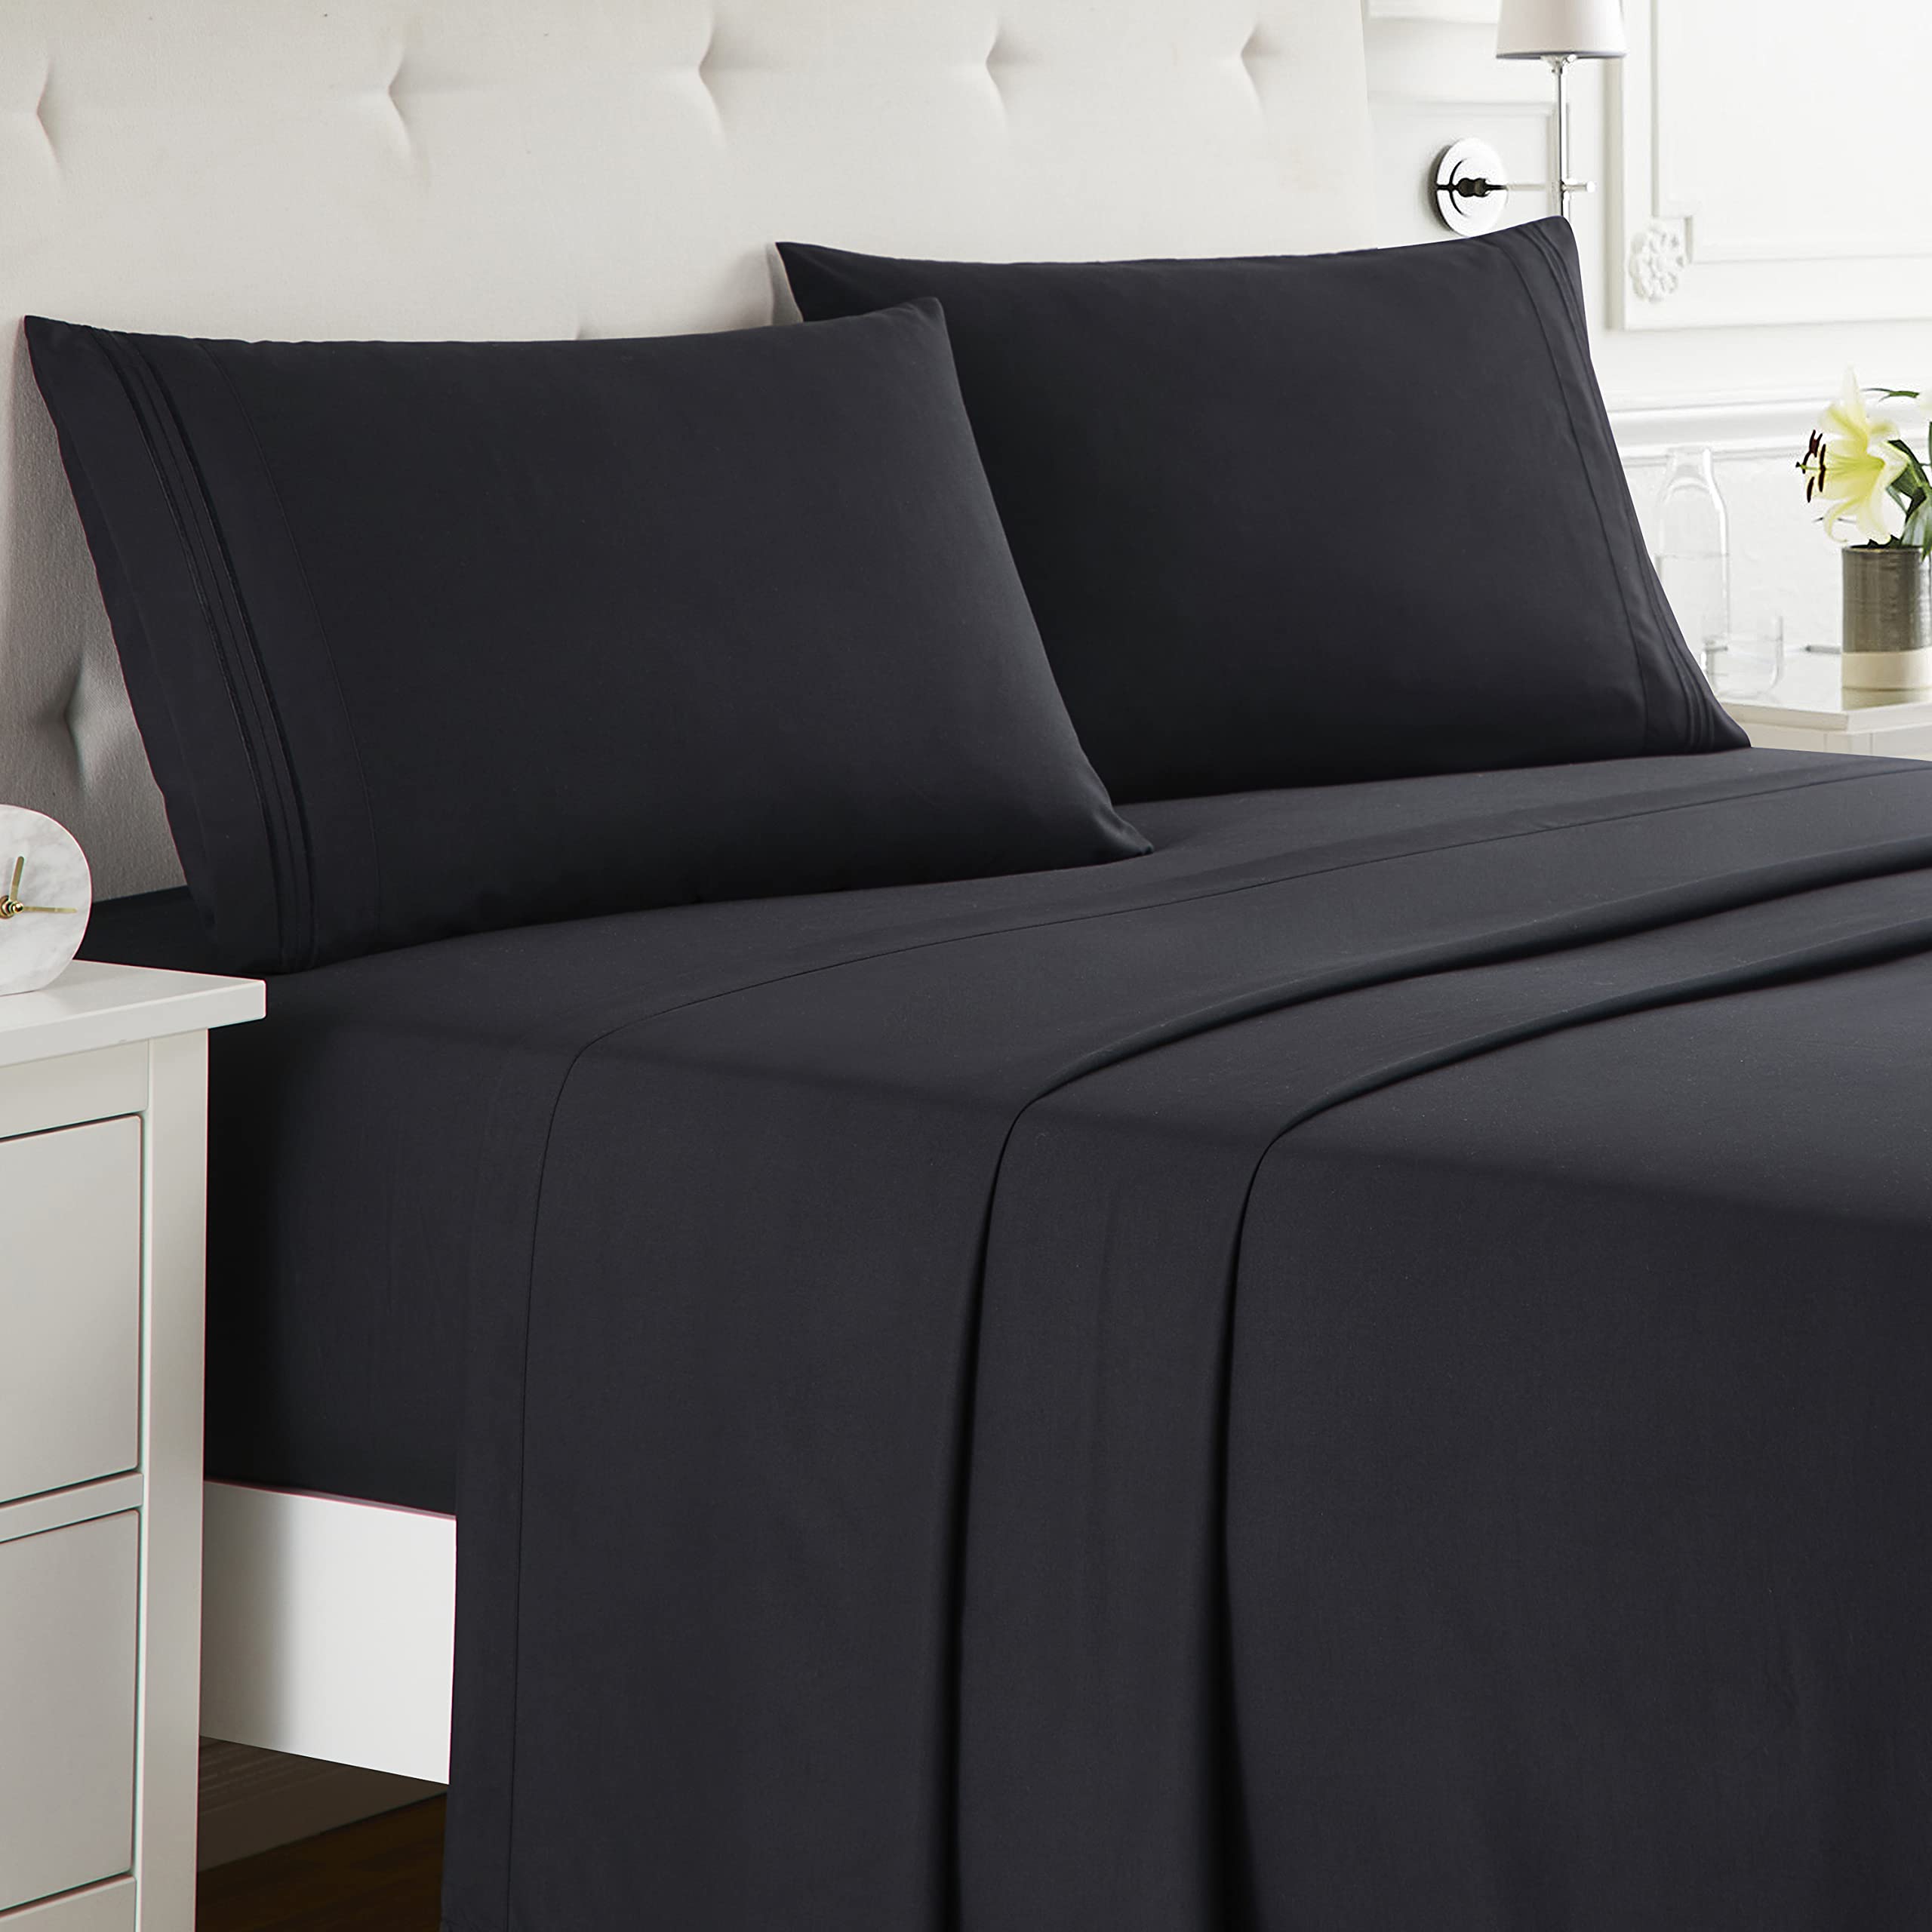 Book Cover Nestl Full Size Sheet Sets - 4 Piece Full Size Sheets, Black Sheets Full Size Bed Sheets, Double Brushed Bed Sheets Full Size, Hotel Luxury Full Bed Sheets Set. Black Full